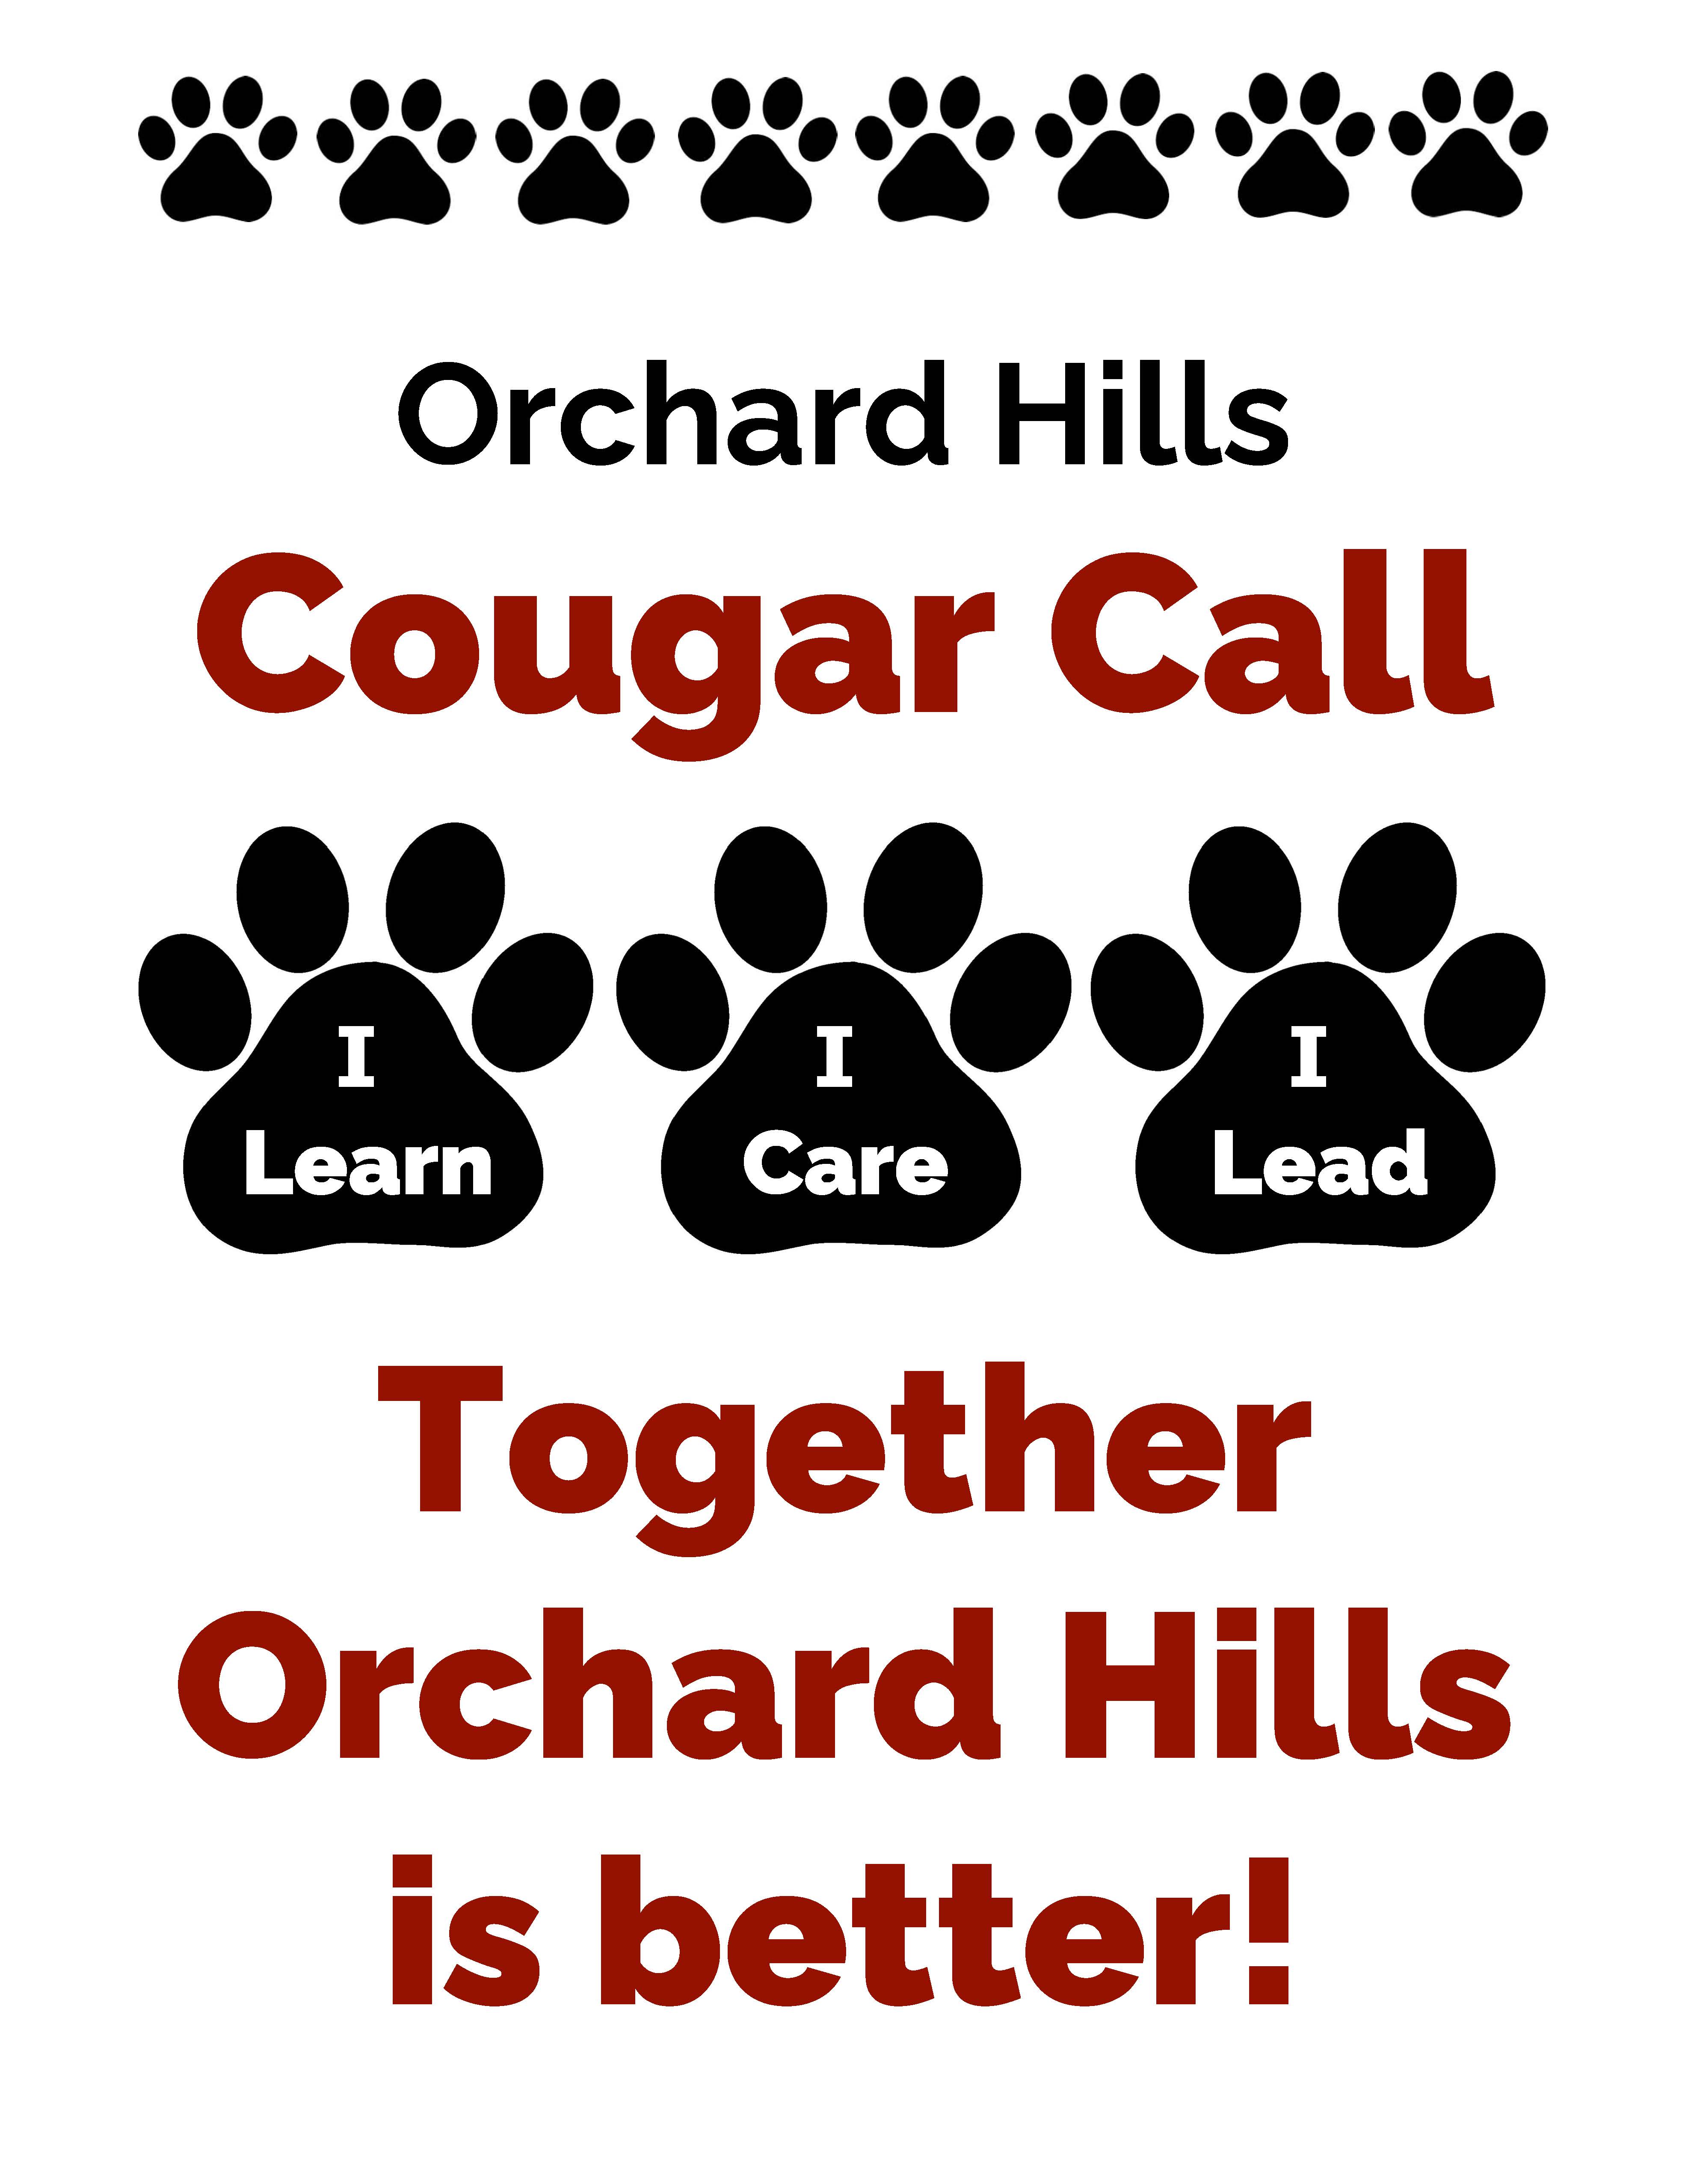 I learn, I care, I lead, Together Orchard Hills is better